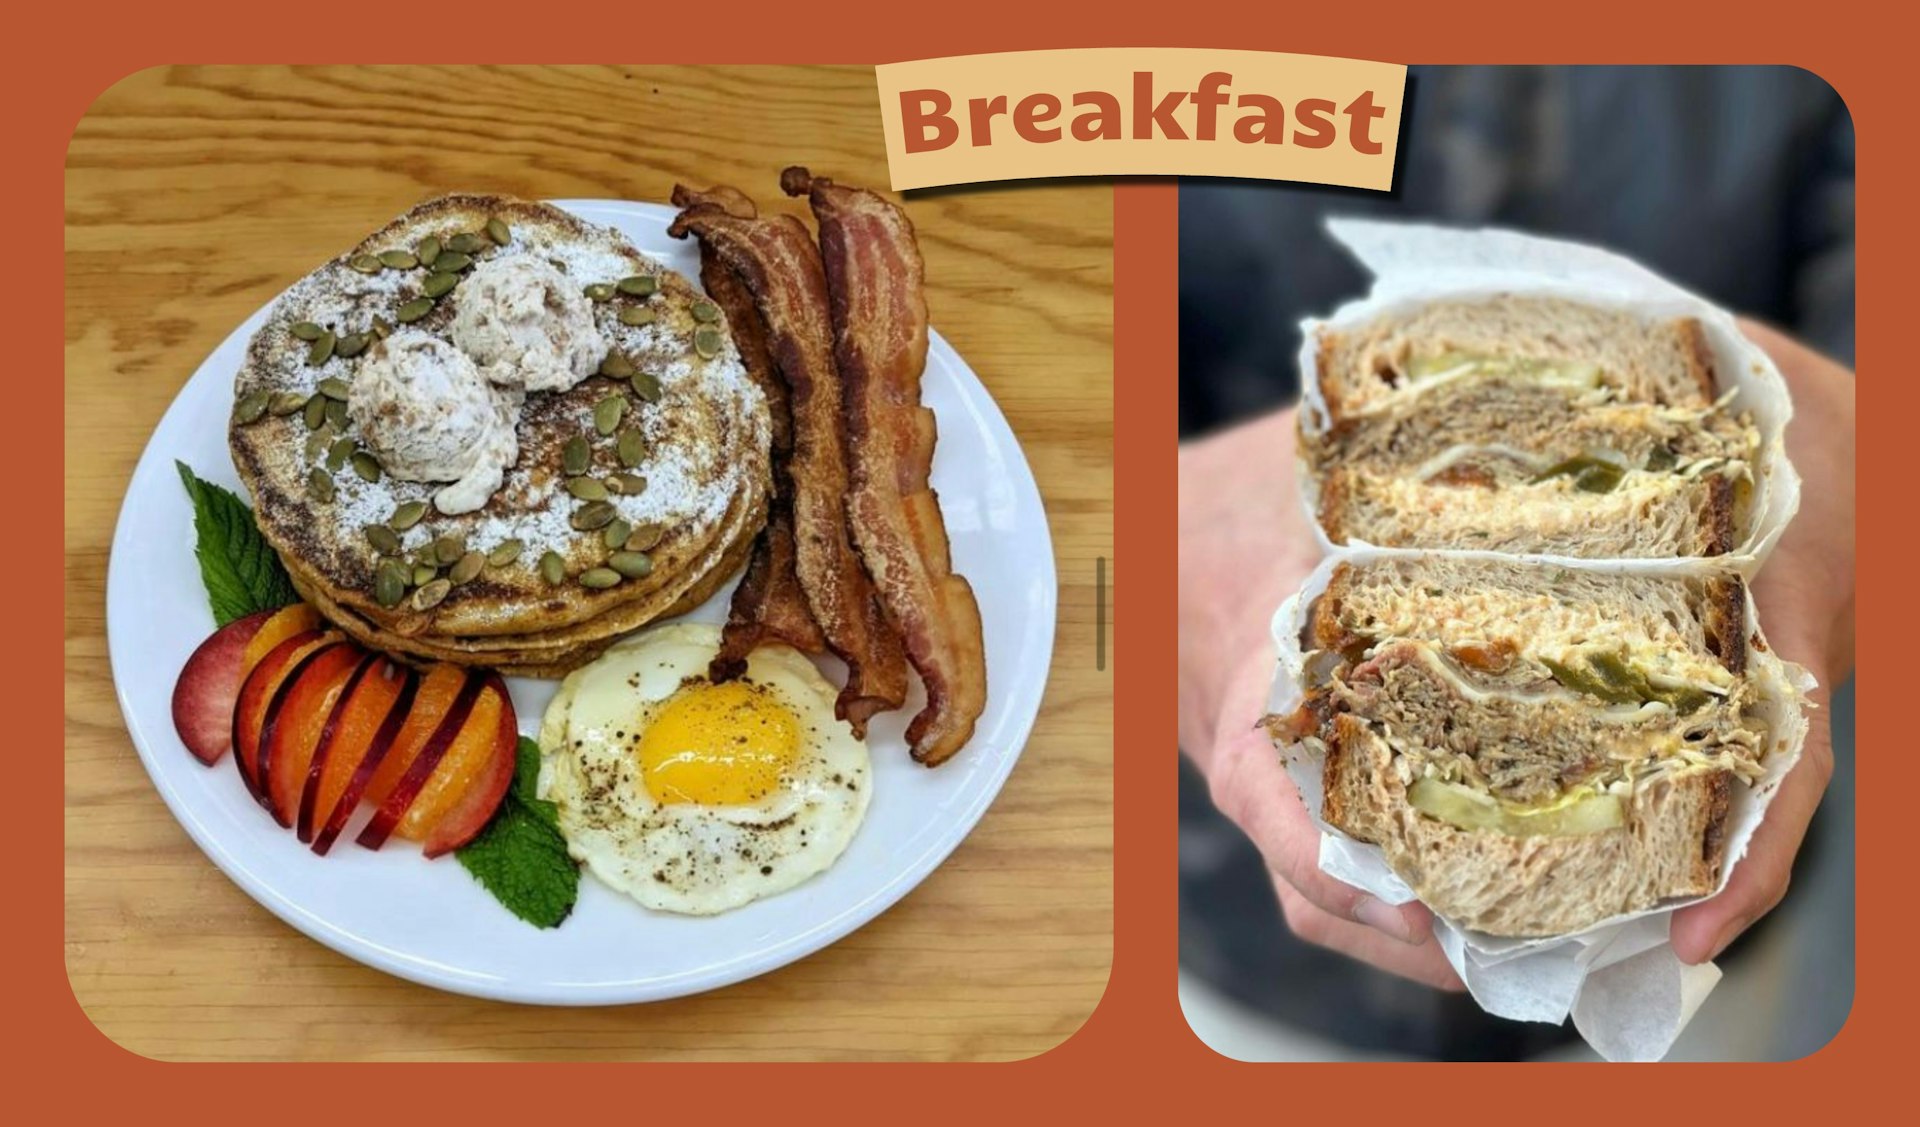 L: pancake breakfast with bacon. R: Up-close shot of meat and pickle sandwich on sourdough bread